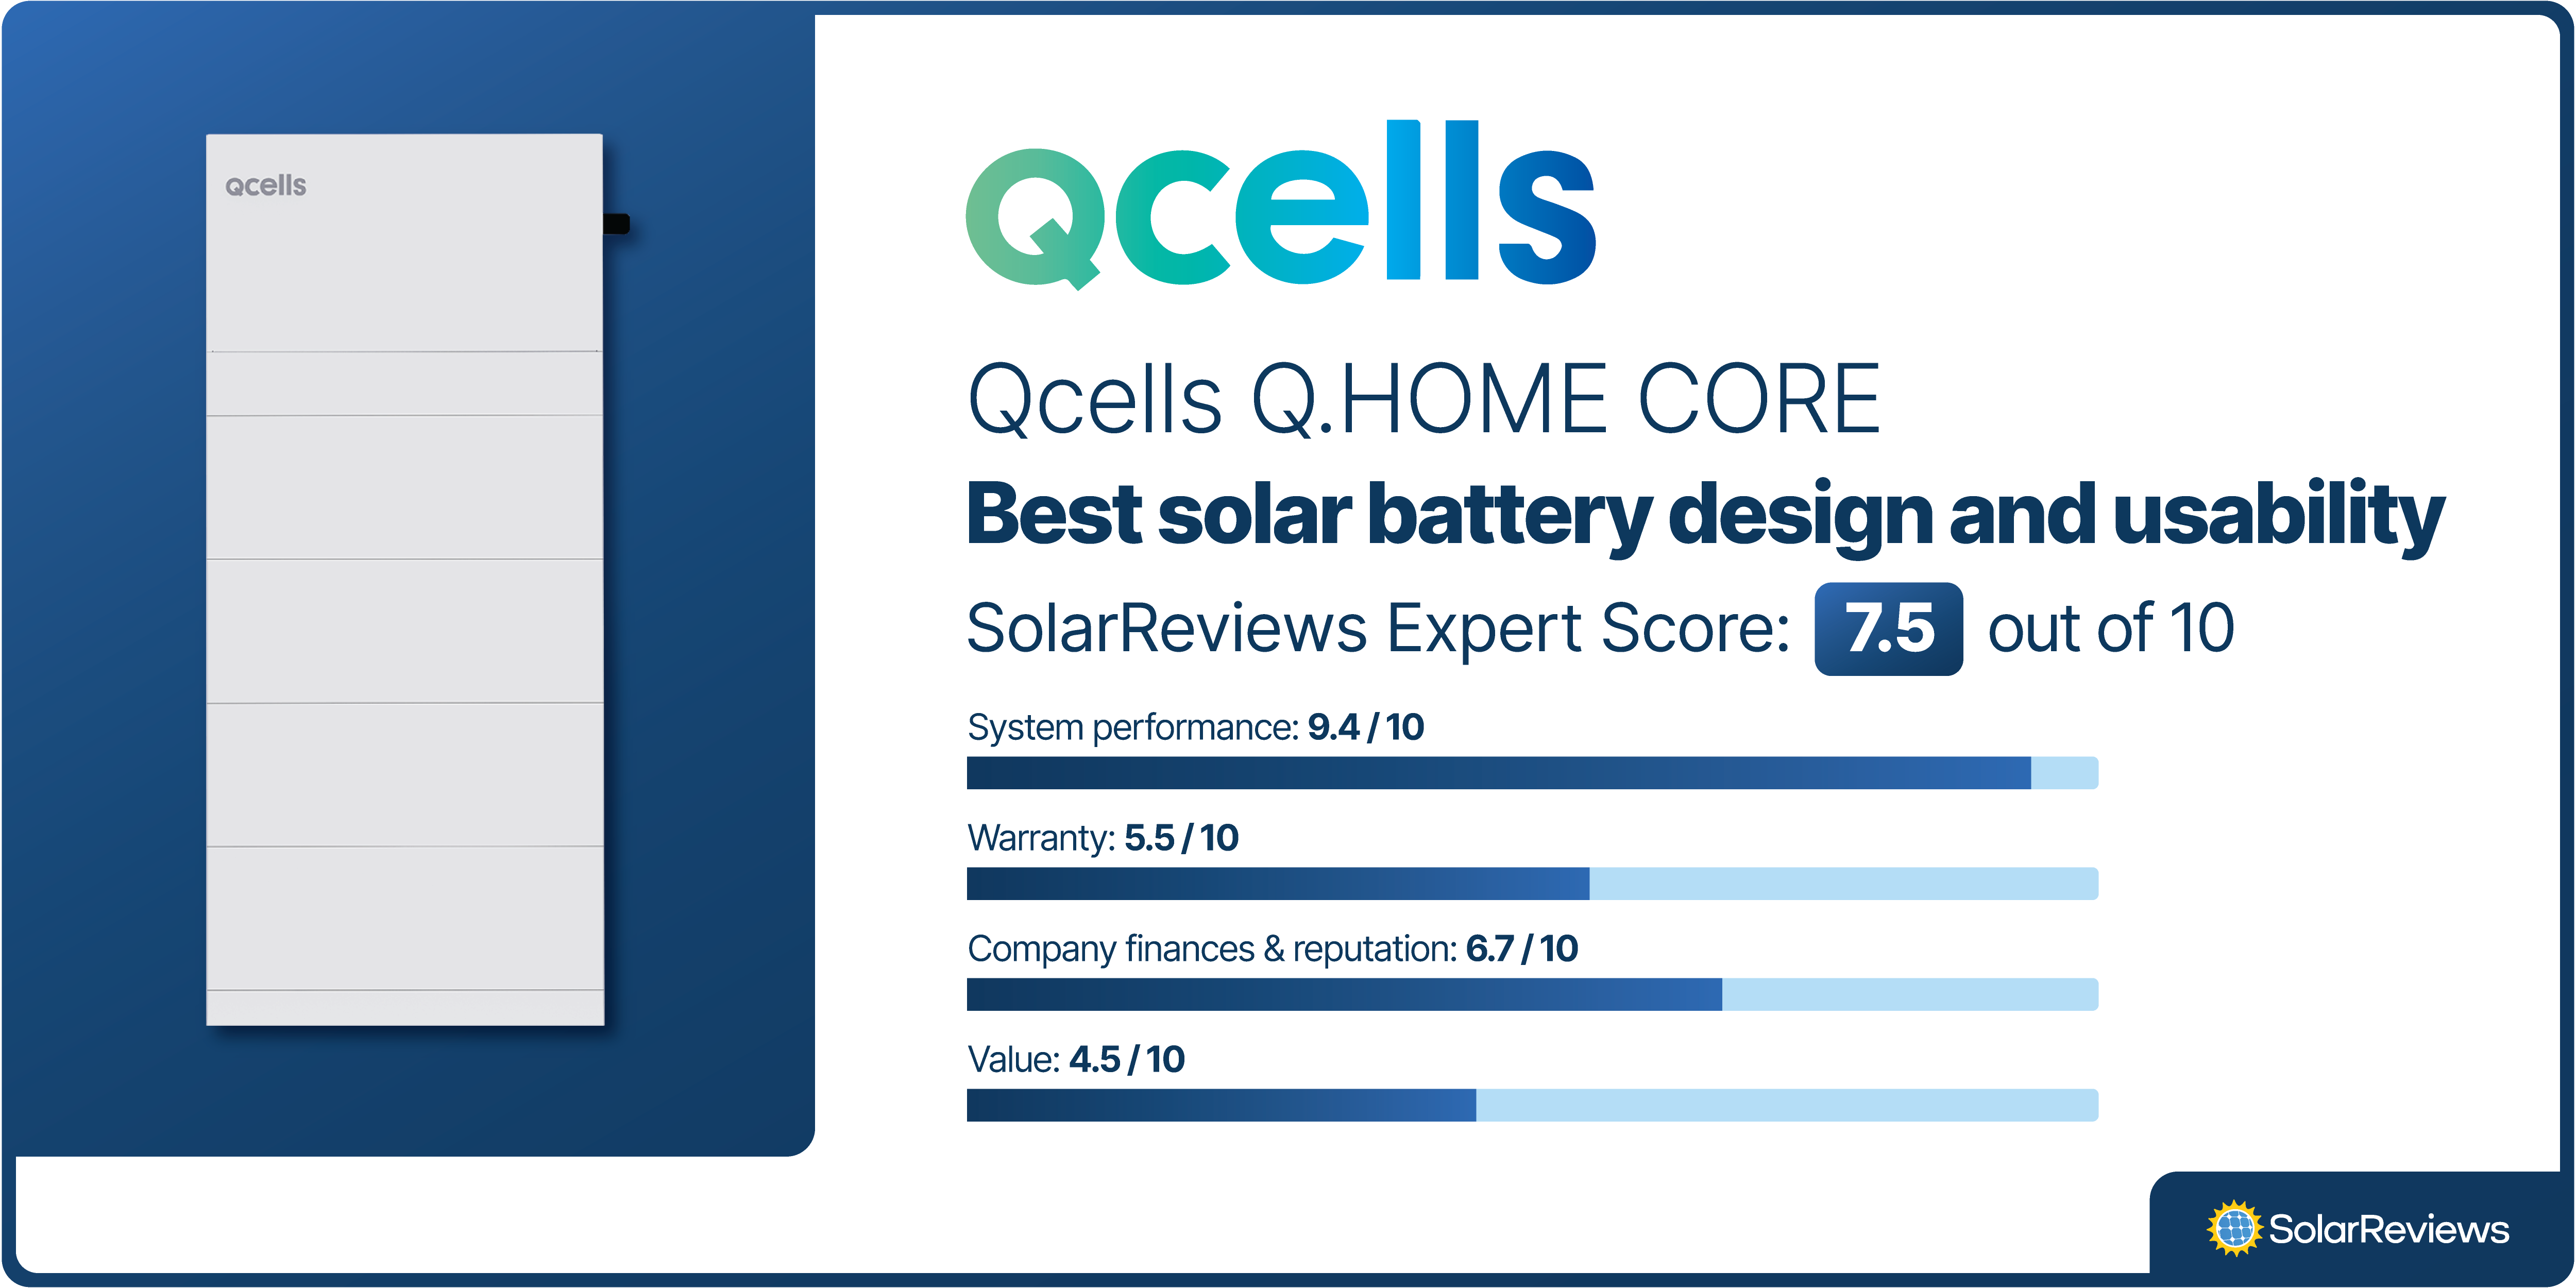 The Qcells Q.HOME CORE was voted best solar battery design and usability, with a SolarReviews Expert Score of 7.5/10, scoring highest in system performance and company finance and reputation.